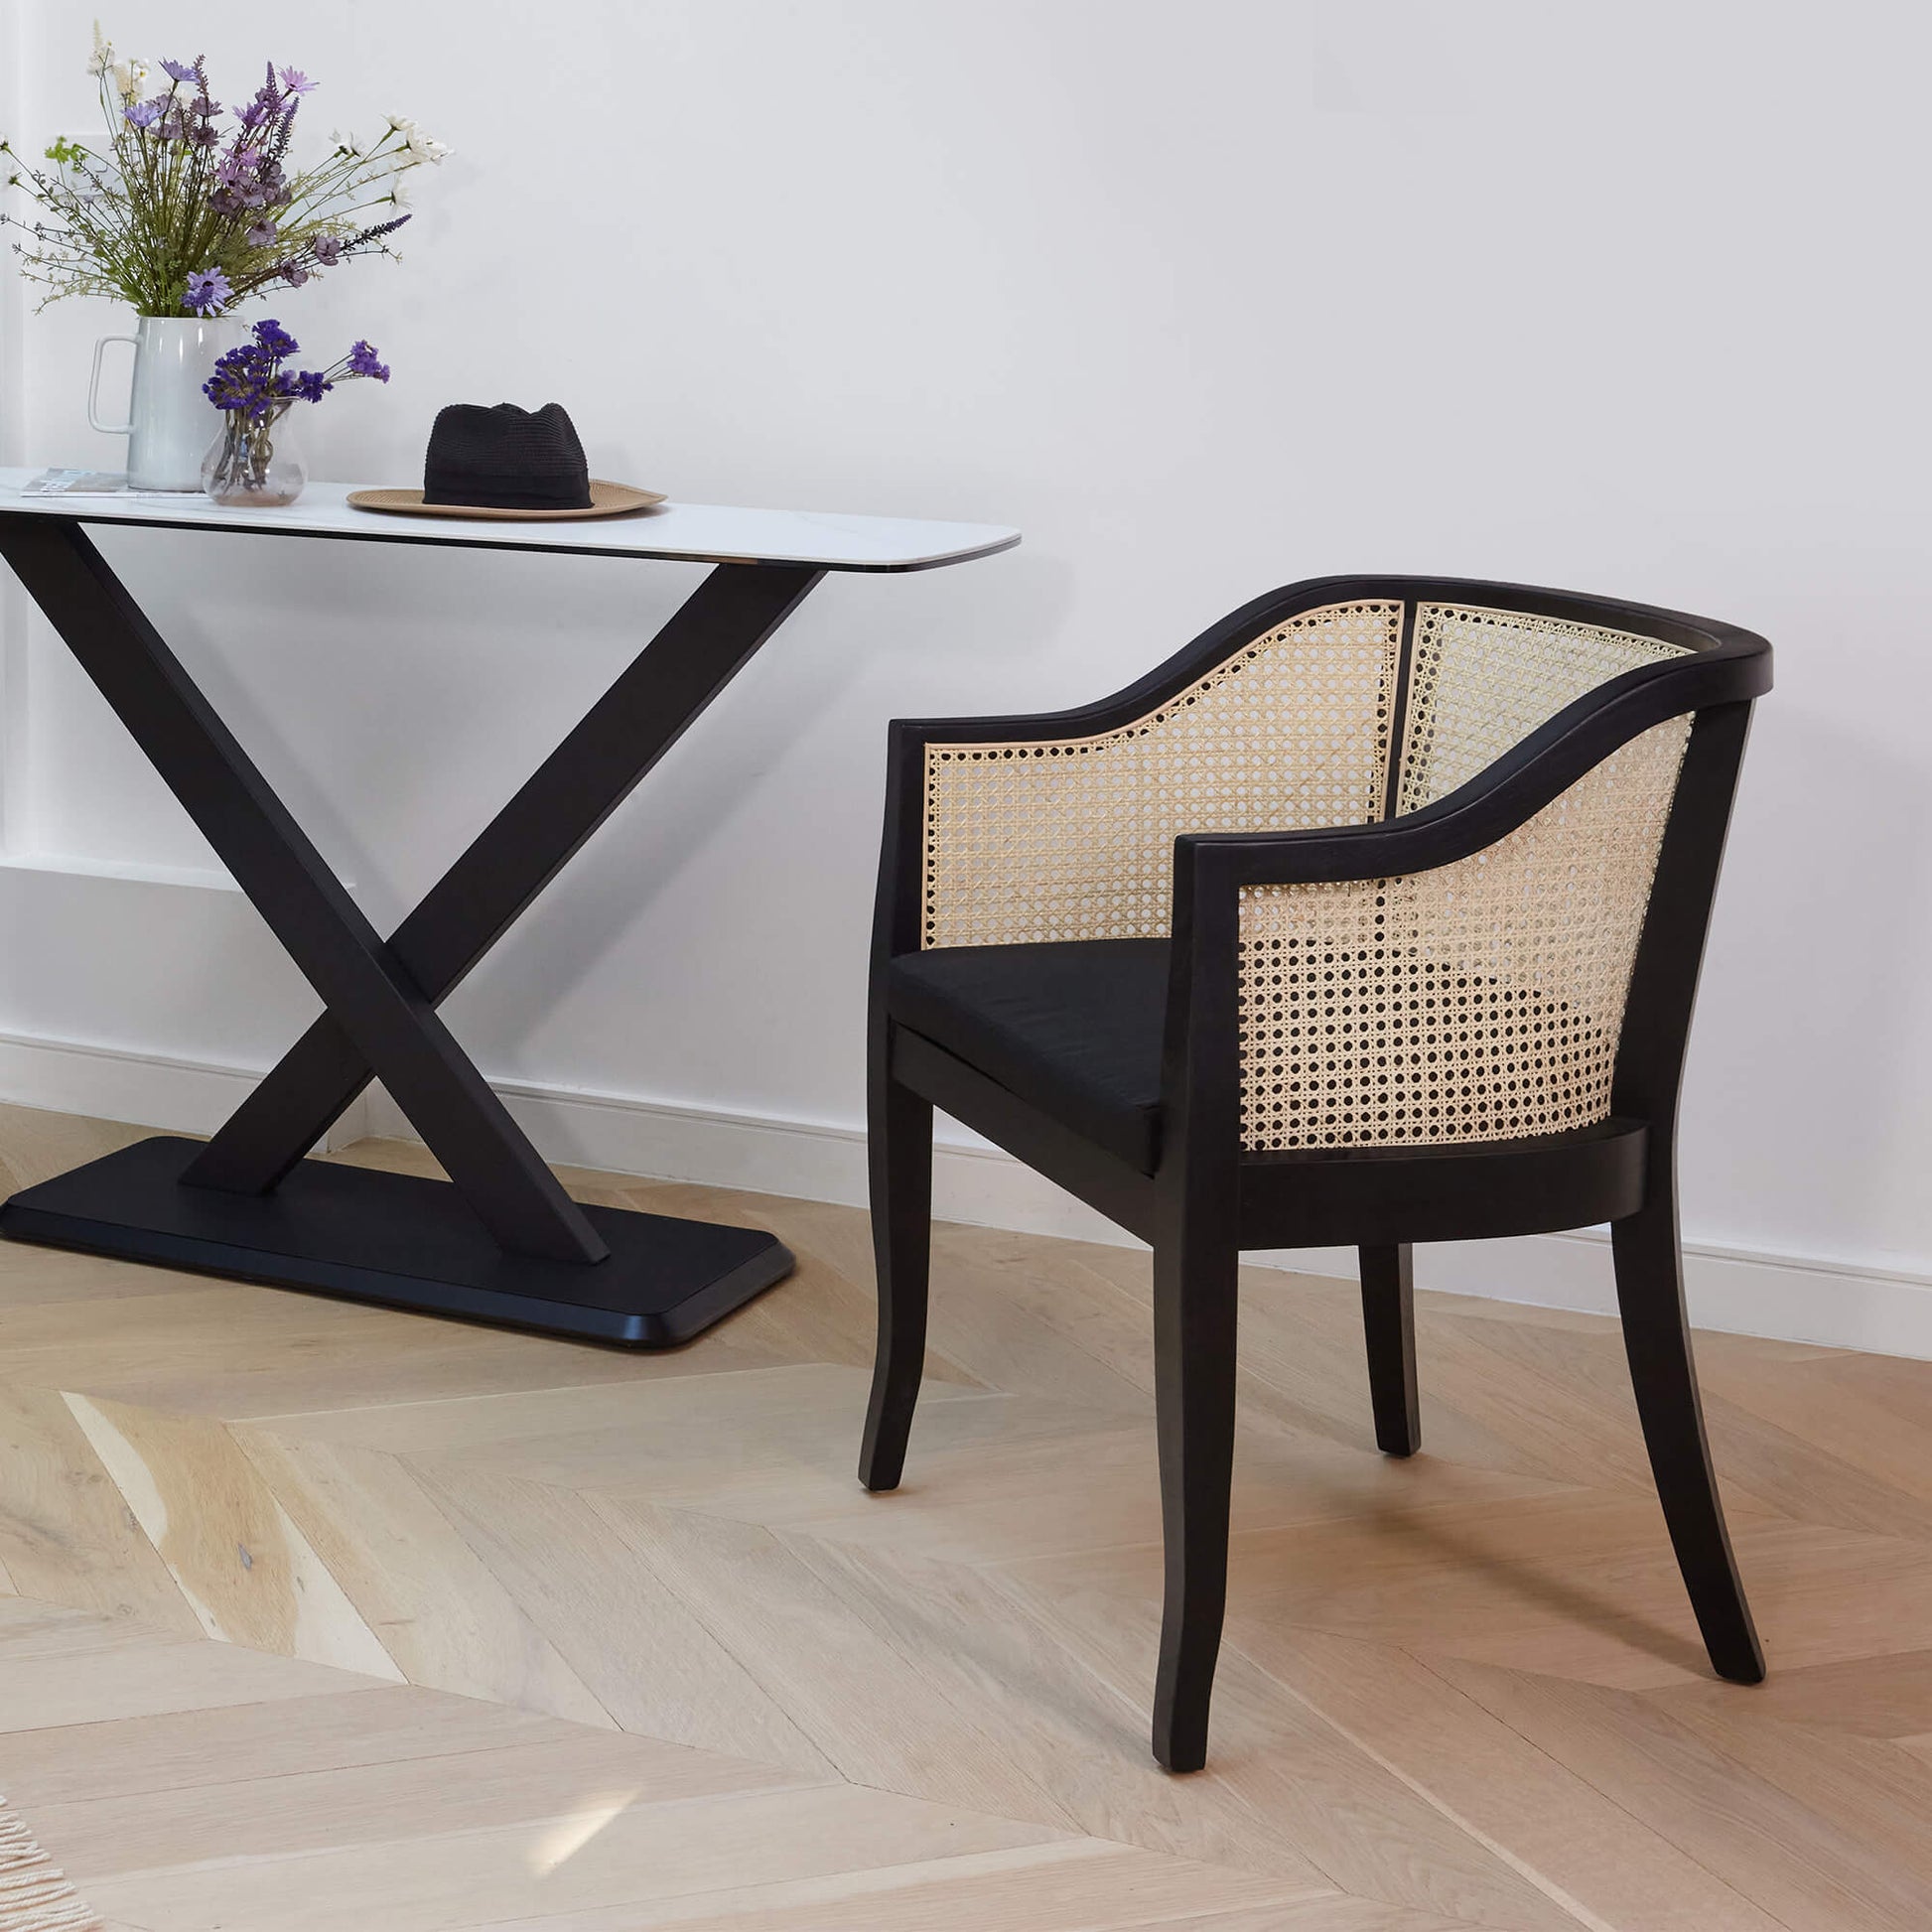 Botanica | Contemporary Black Rattan Dining Chair With Arms | Black